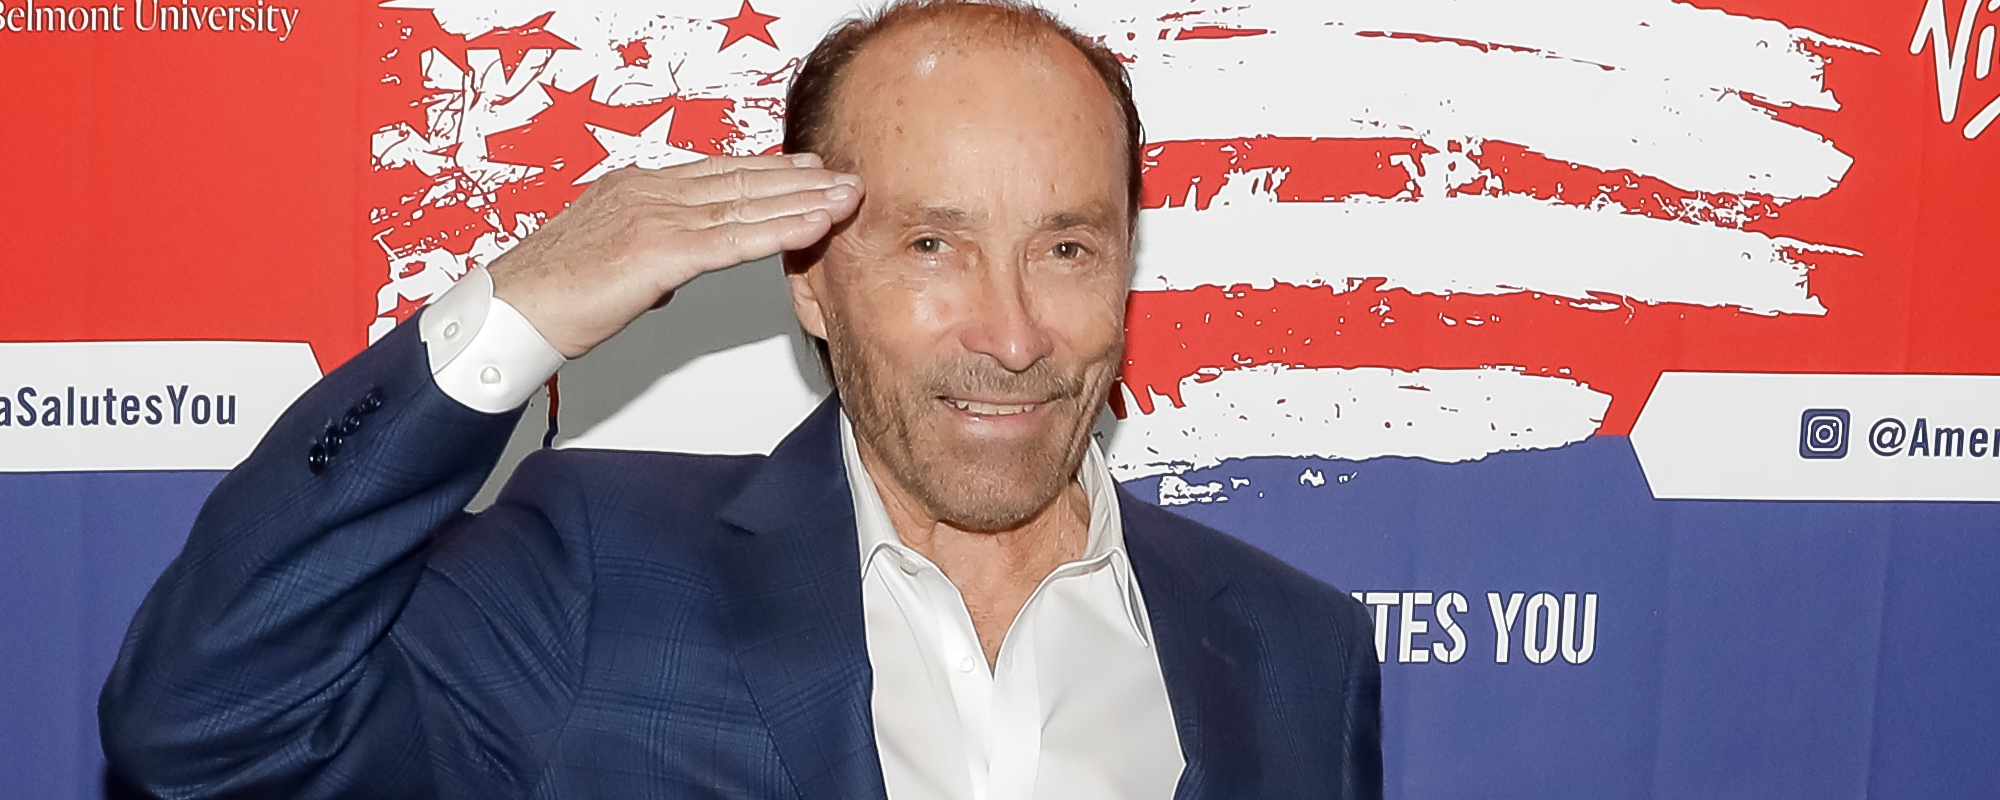 Lee Greenwood Celebrates 40th Anniversary of “God Bless the USA” With All-Star Salute Featuring Lee Brice, Dolly Parton, & More